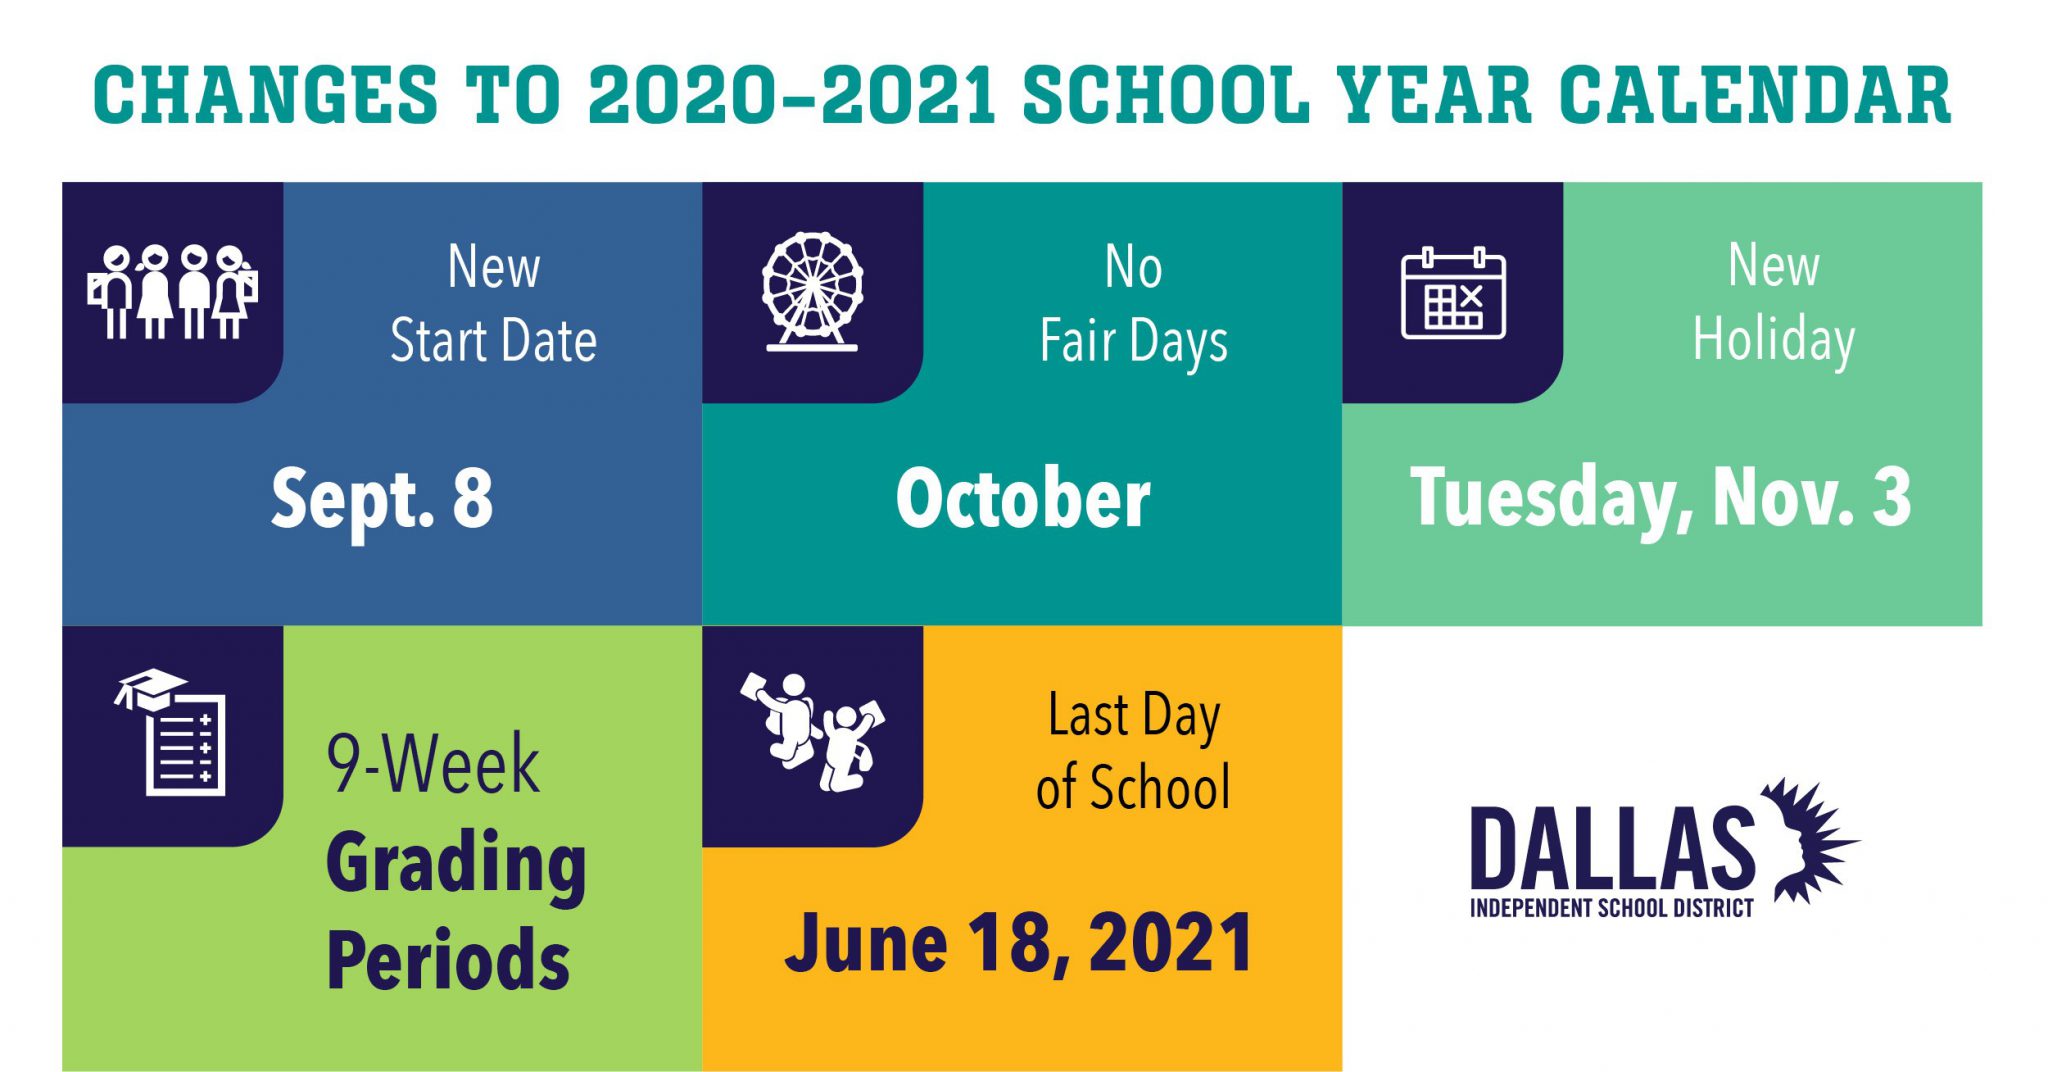 Dallas ISD Board of Trustees approves changes to school year calendar